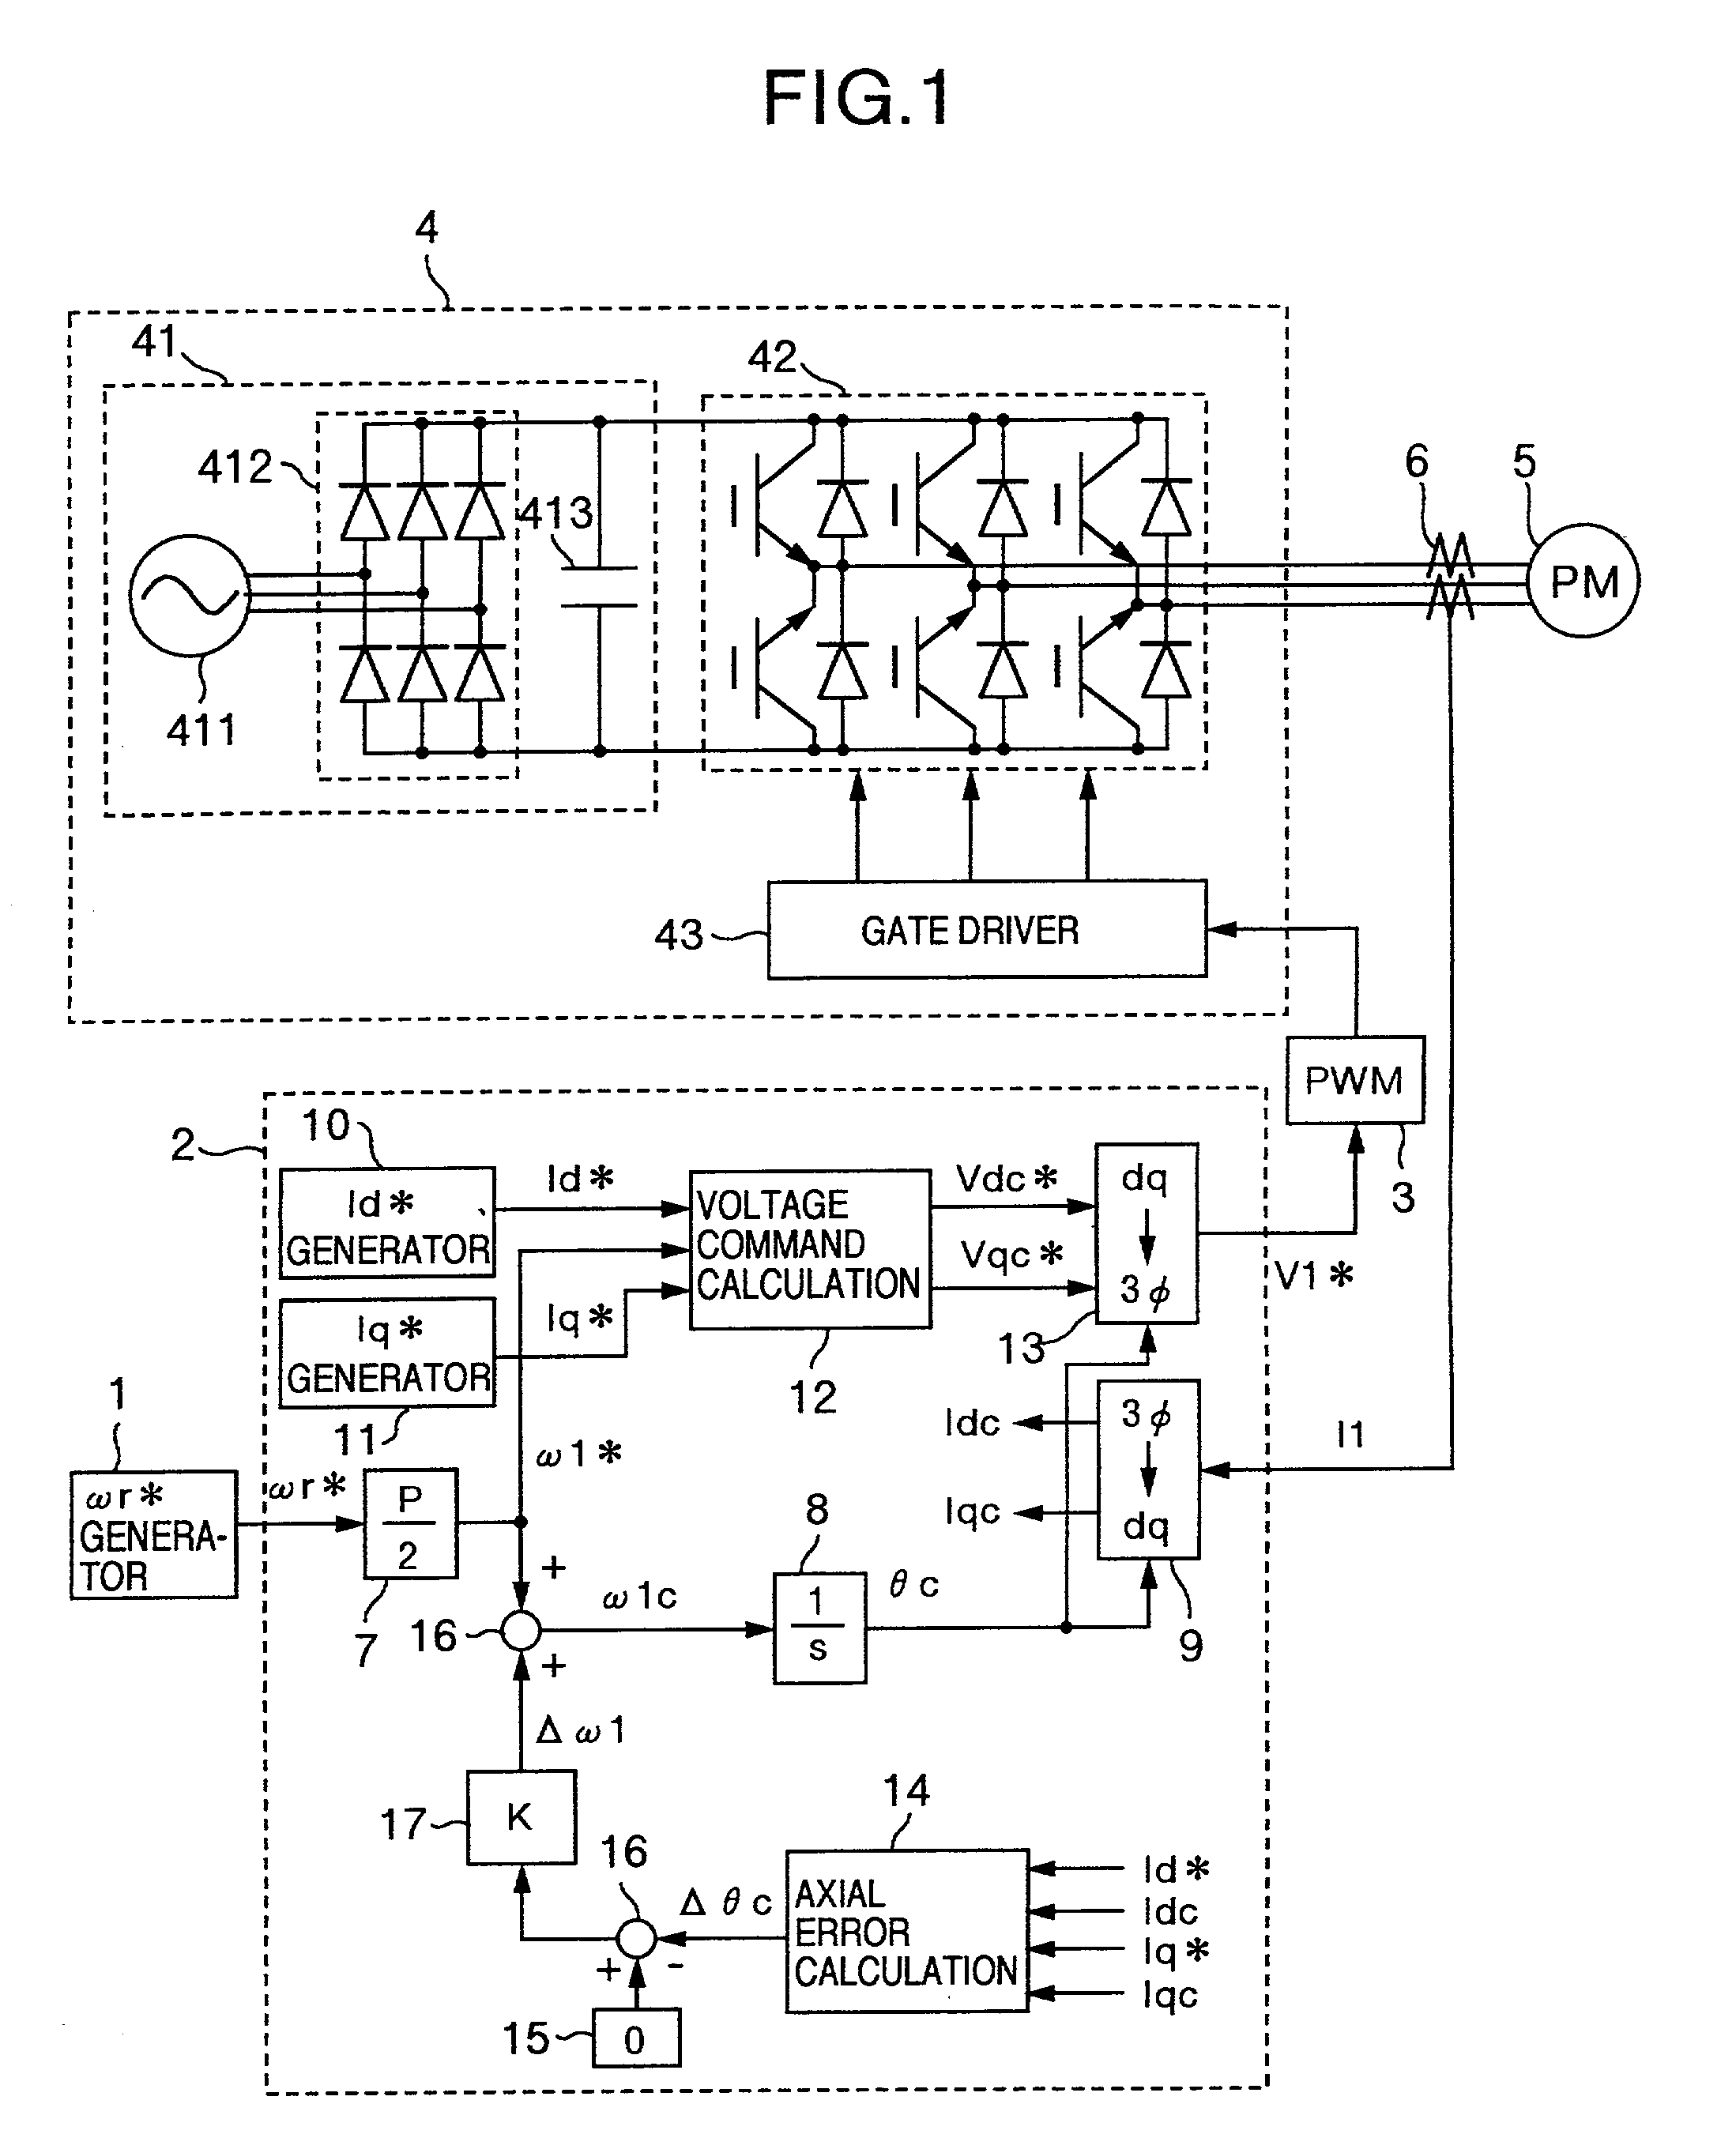 Synchronous motor driving system